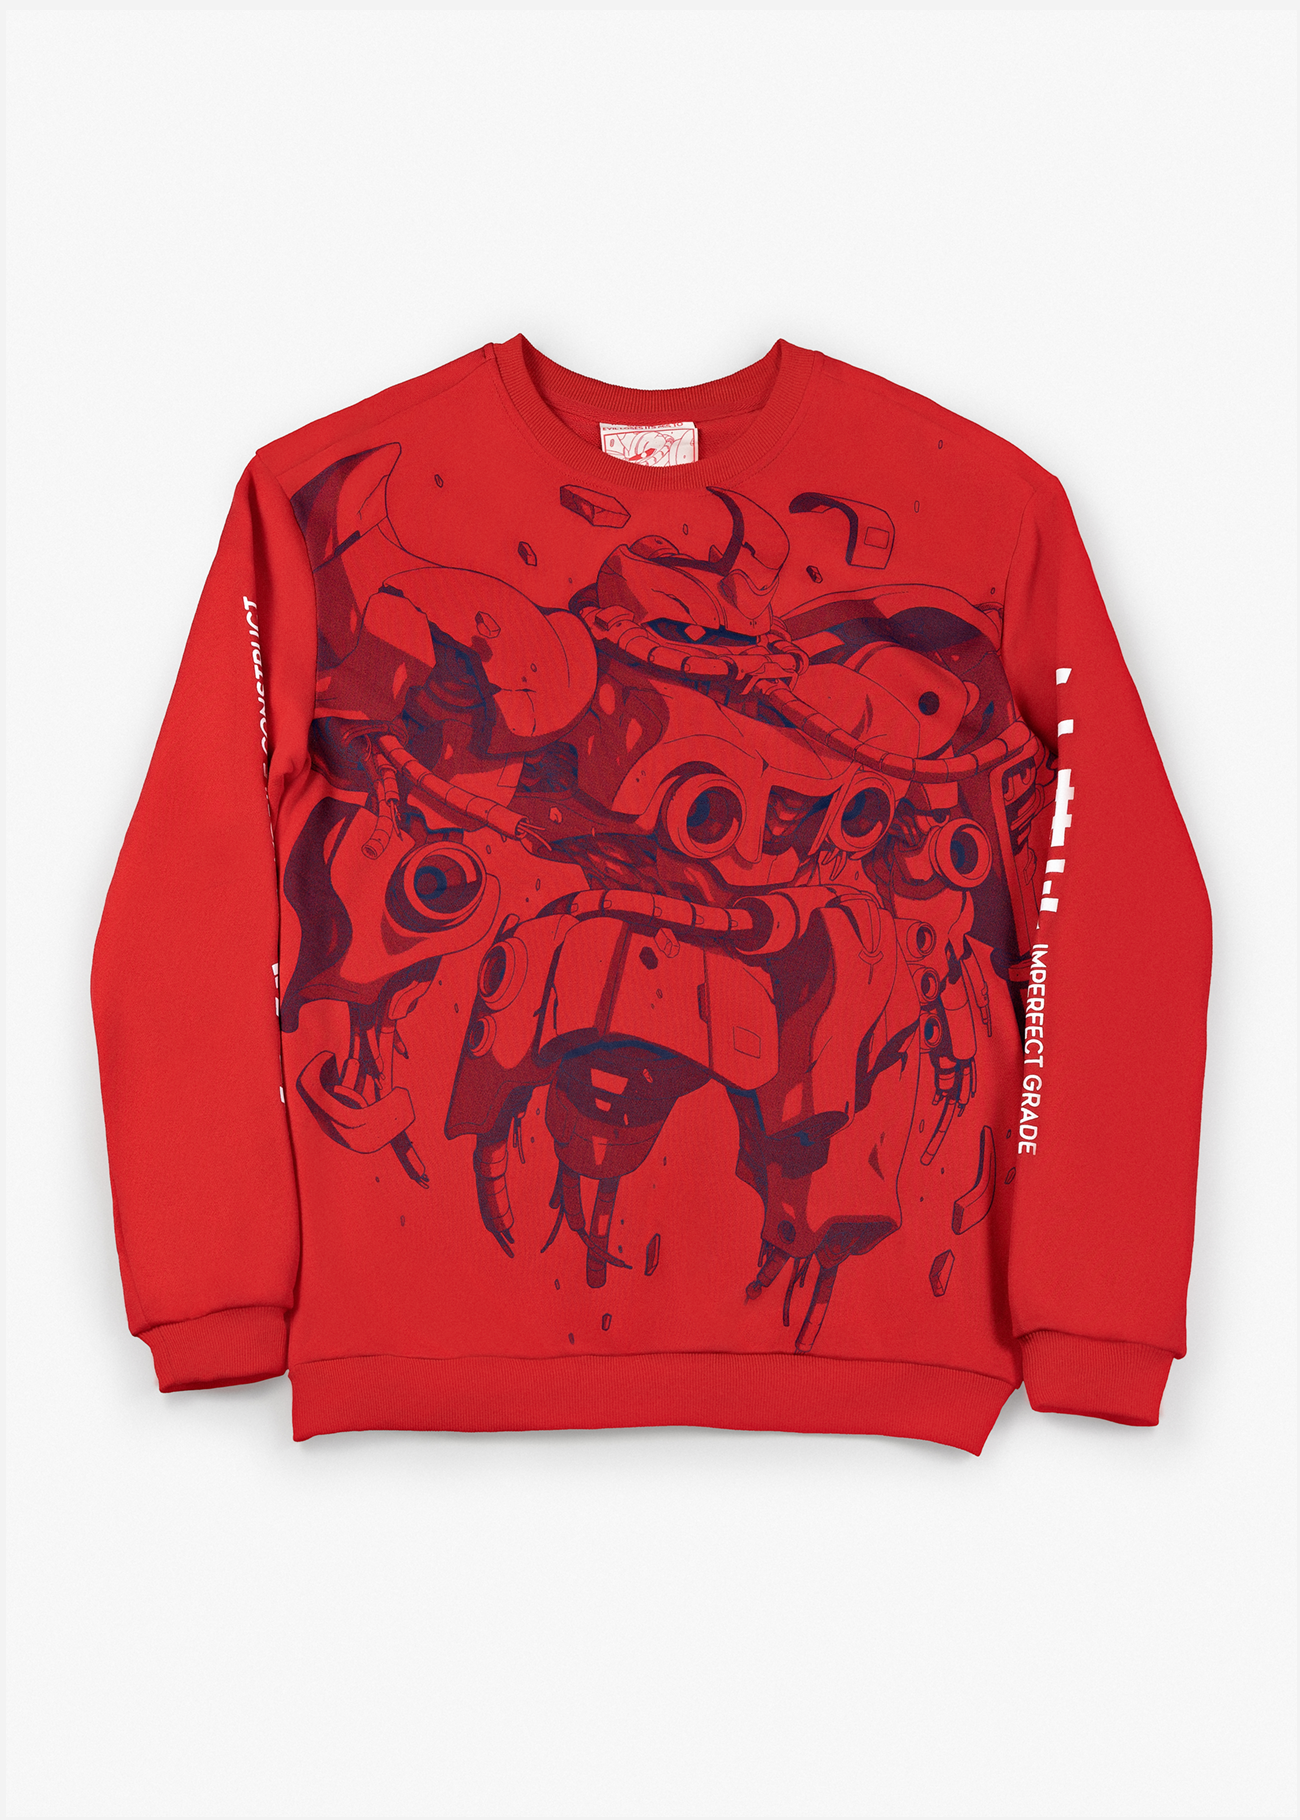 Photo of the front of Red sweater with a mecha anime design on the front in screen print, inspired anime clothing